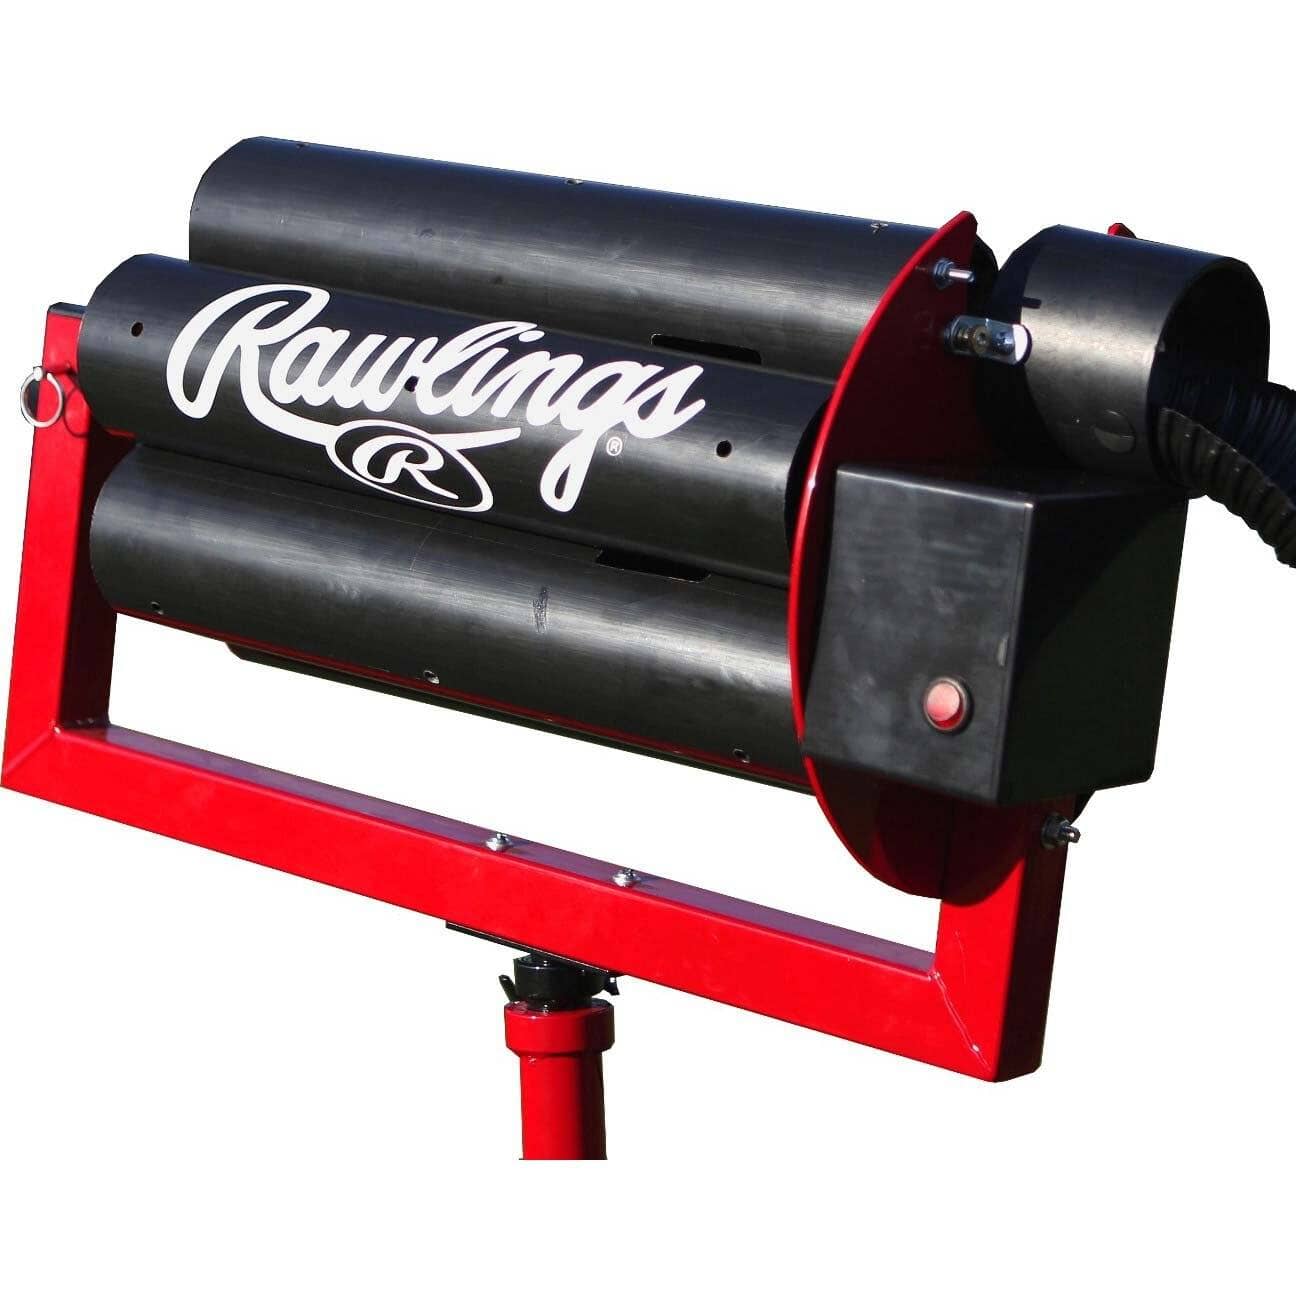 Rawlings Pitching Machine Automatic Turret Ball Feeder Close Up View